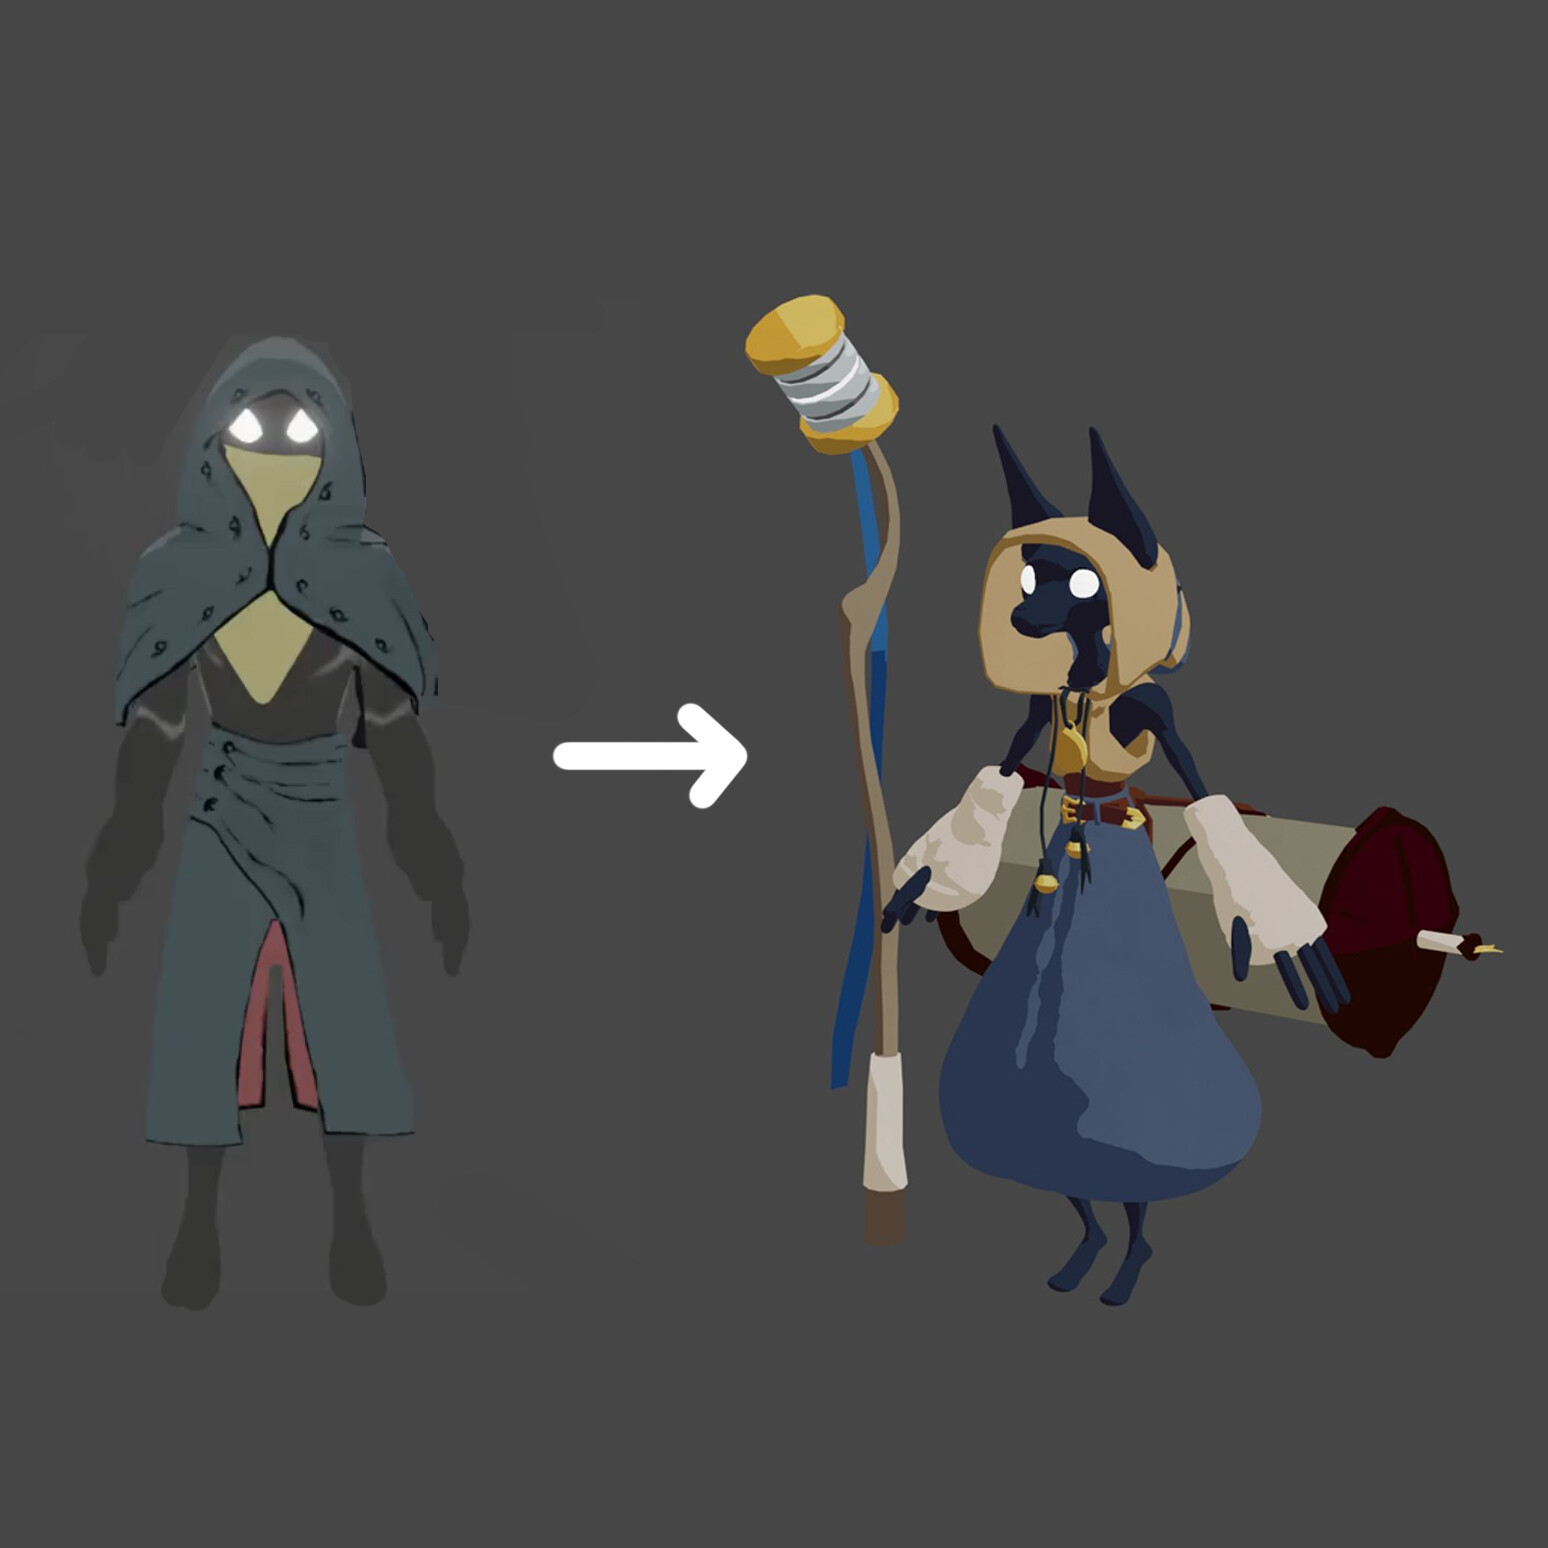 The initial character made for the game vs the character made for the Kickstarter after my recommendations and concepts.
The main goal was to improve contrasts in various environments, for accessibility purposes and lore.
3D by HeartBeat Games.